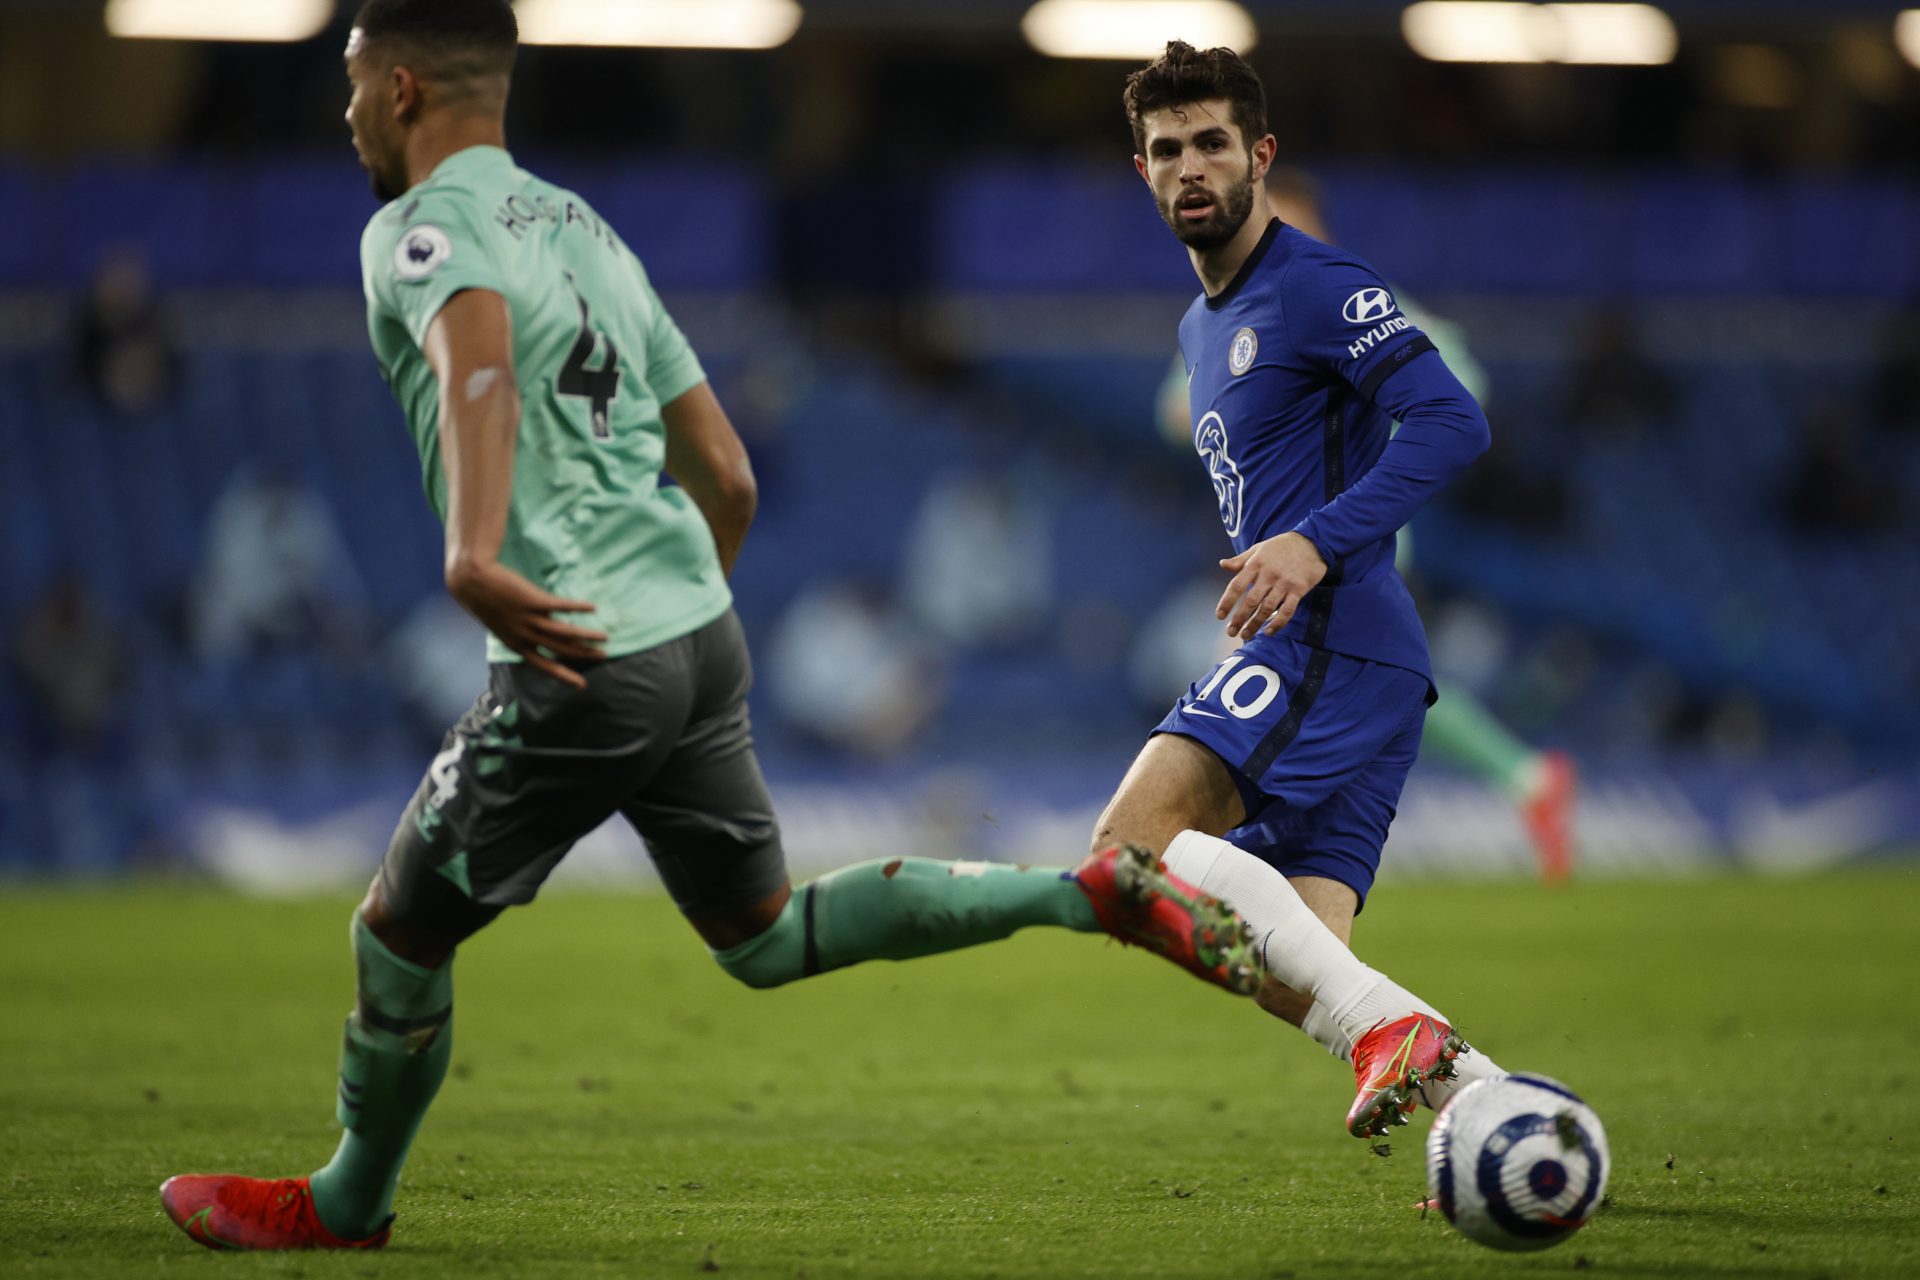 Chelsea's Christian Pulisic, right, in action during the English Premier League soccer match between Chelsea and Everton at the Stamford Bridge stadium in London, Monday, March 8, 2021.